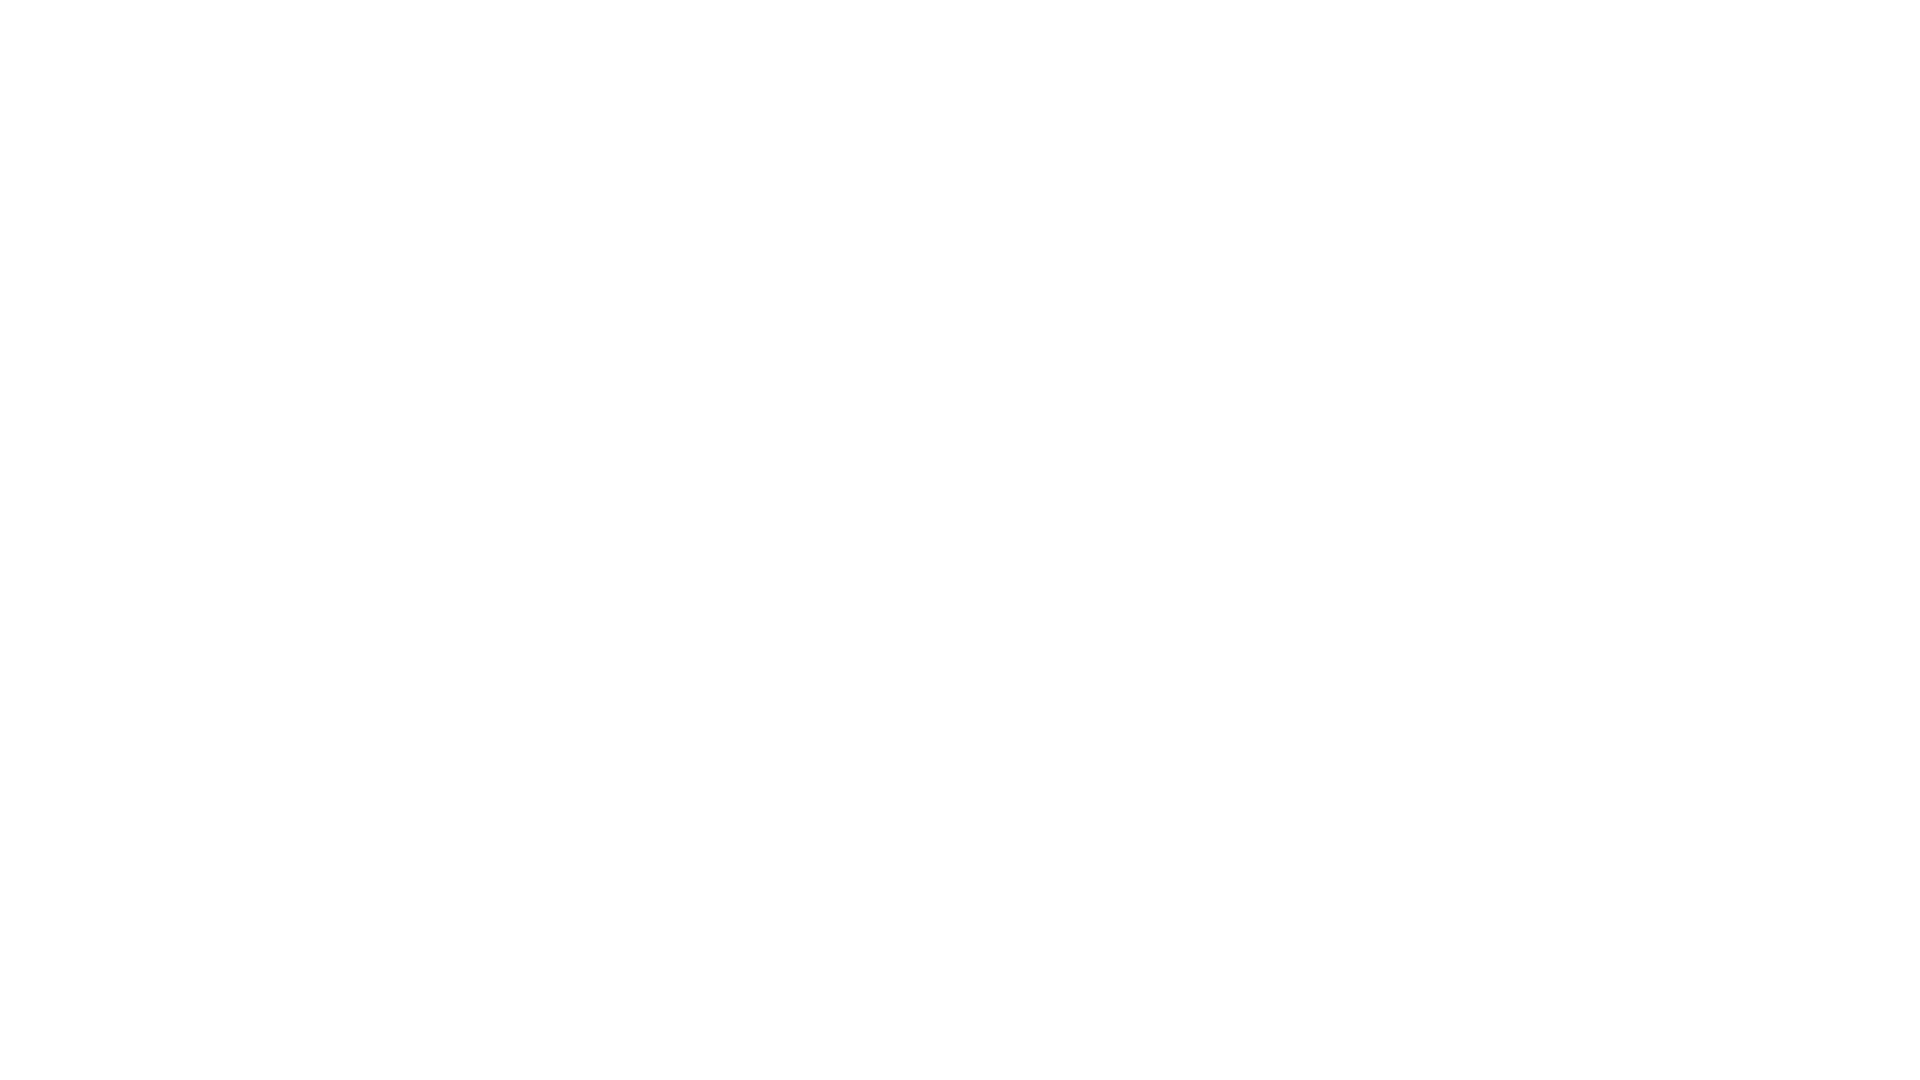 The Brysdales logo. To the left, a sliced hexagon icon, and underneath it says, "The smarter way to store."